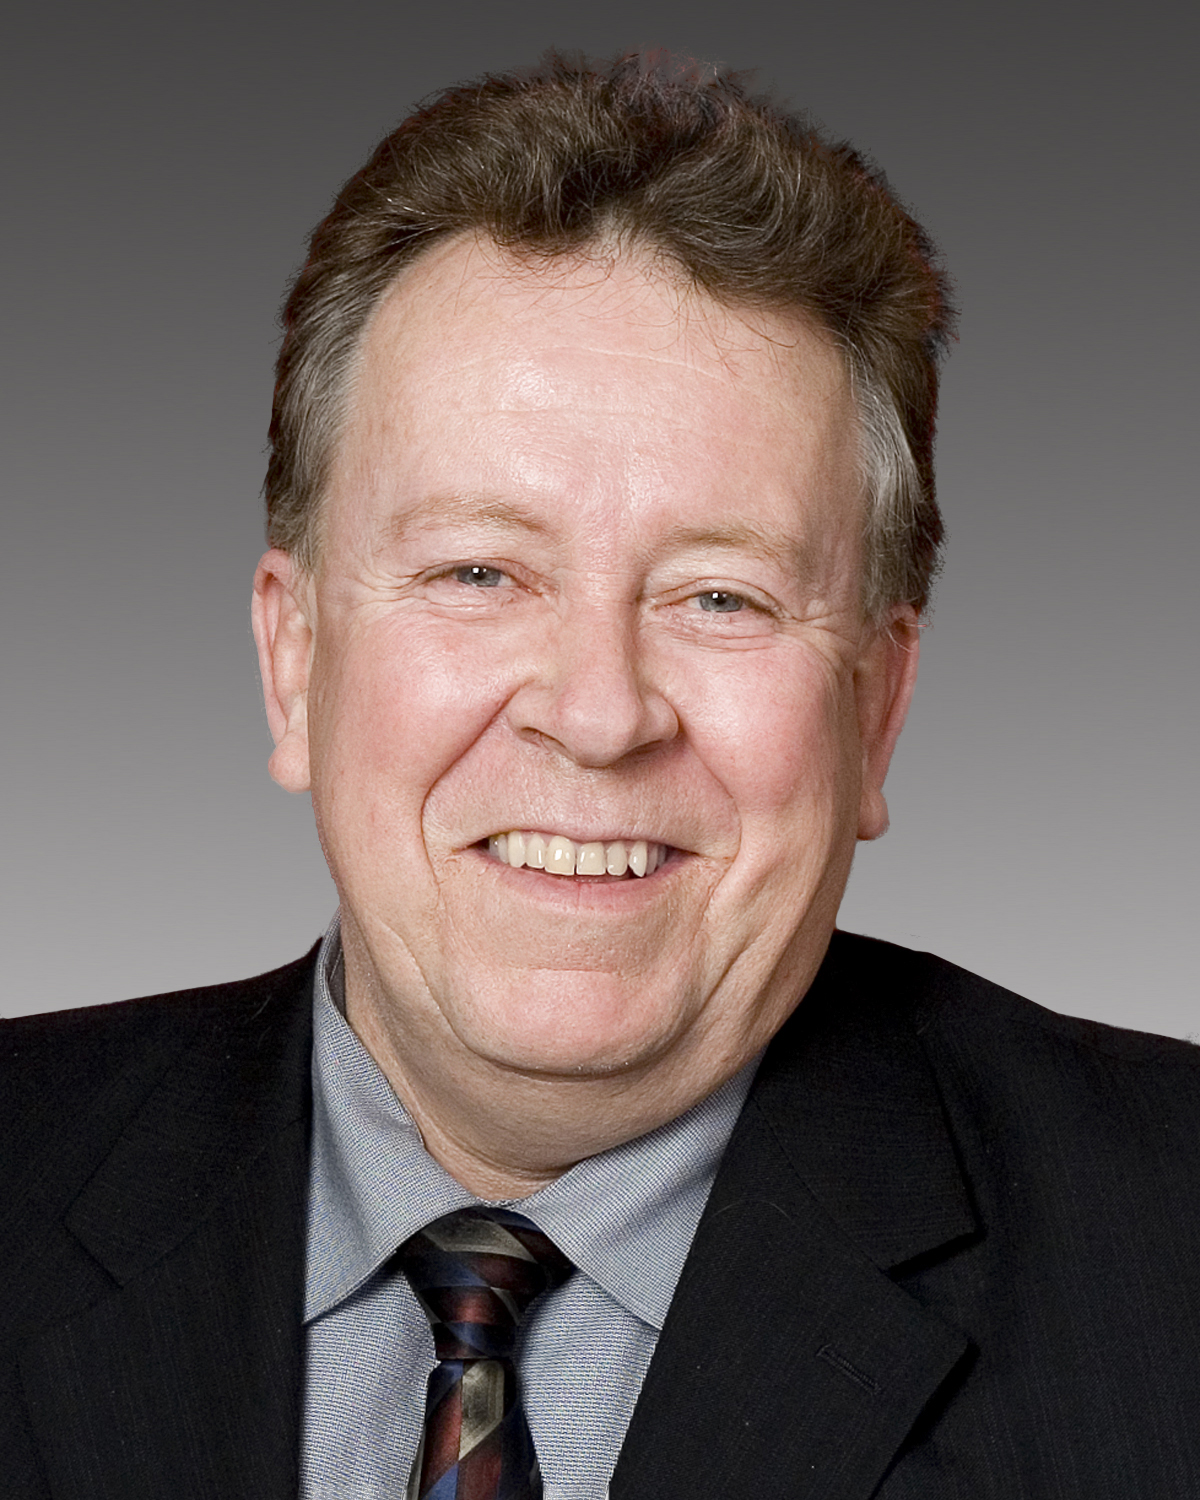 In brief: Liberal MPP Michael Gravelle not running in June